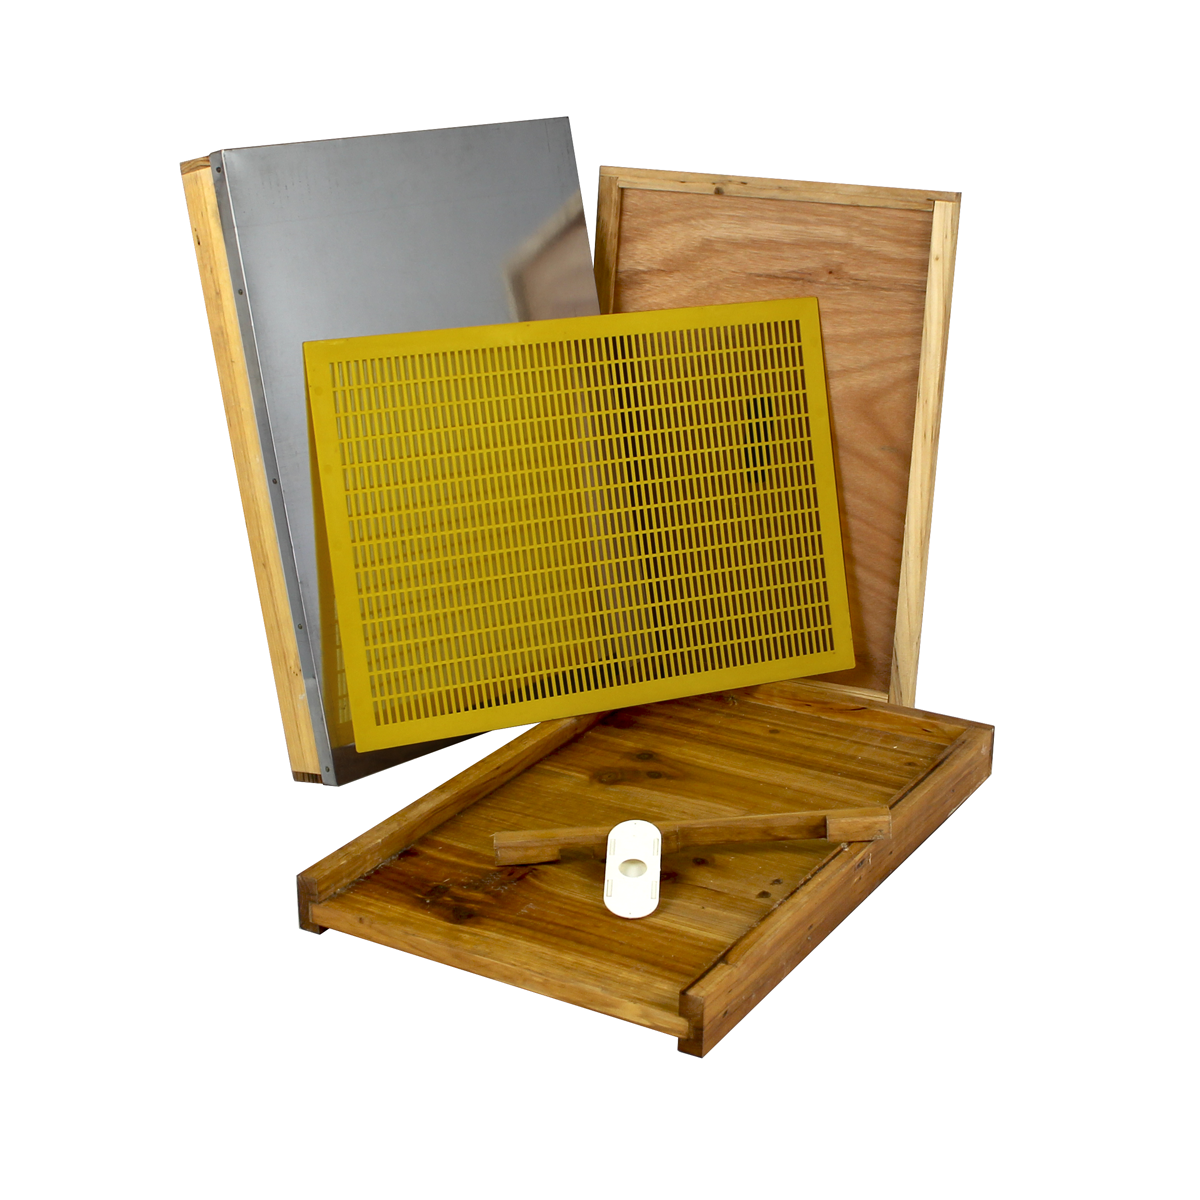 8 Frame Covers Kit With Telescoping Top Cover, Queen Excluder, Inner Cover, Bottom Board, Entrance Reducer, and Bee Escape